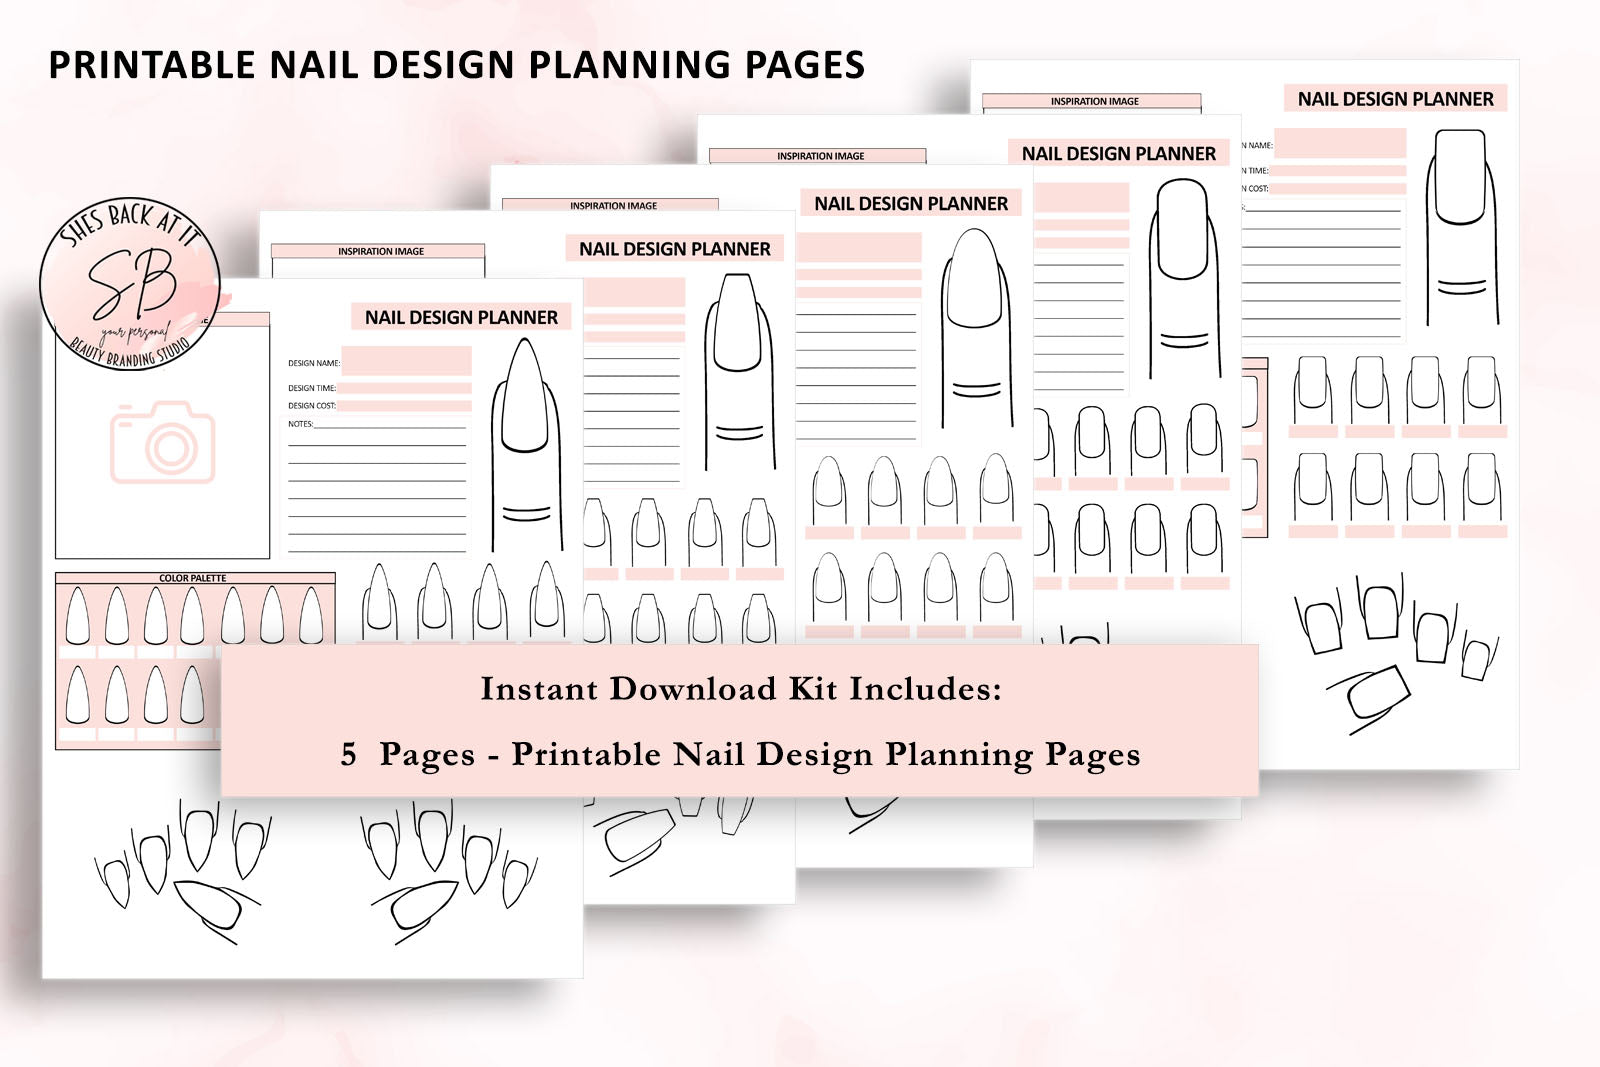 Nail Design Planning Pages